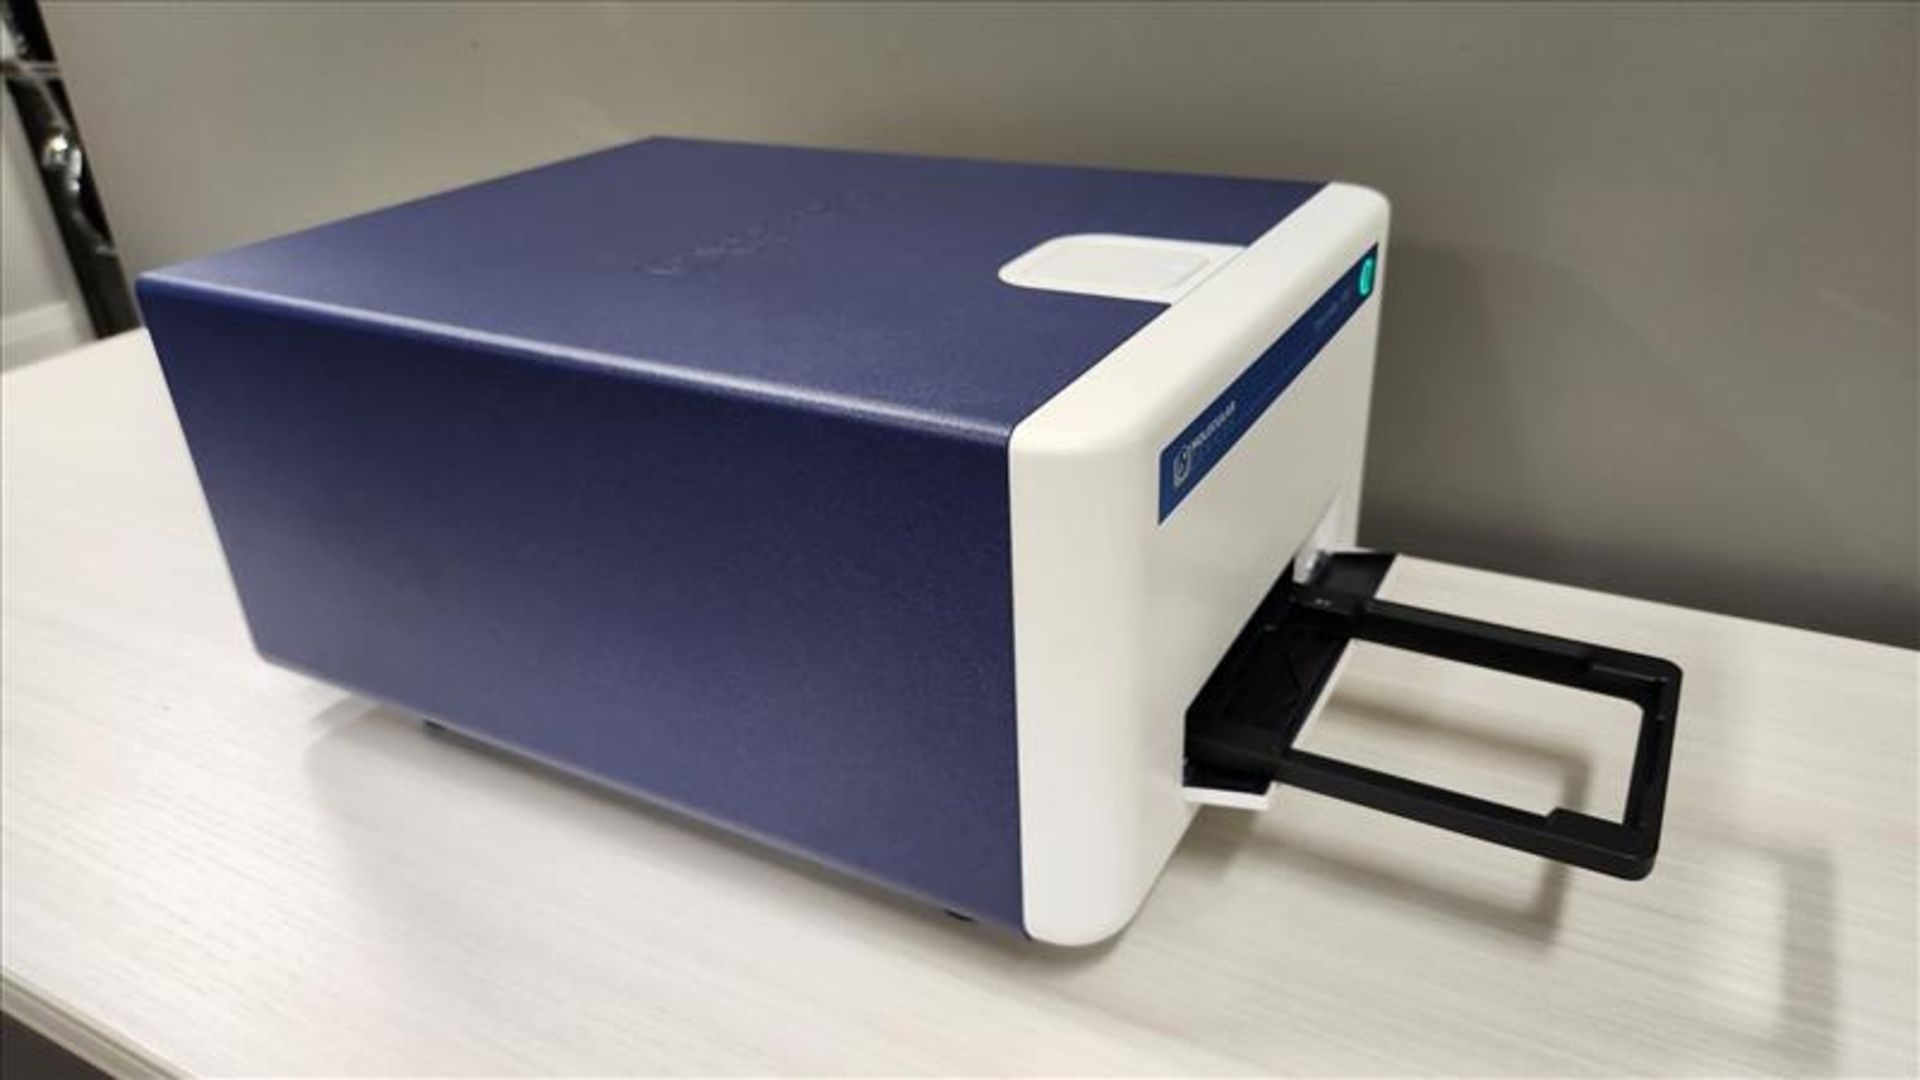 Molecular Devices SpectraMax ABS Plus Absorbance Microplate Reader, S/N ABP01300 with SoftMax Pro - Image 8 of 15